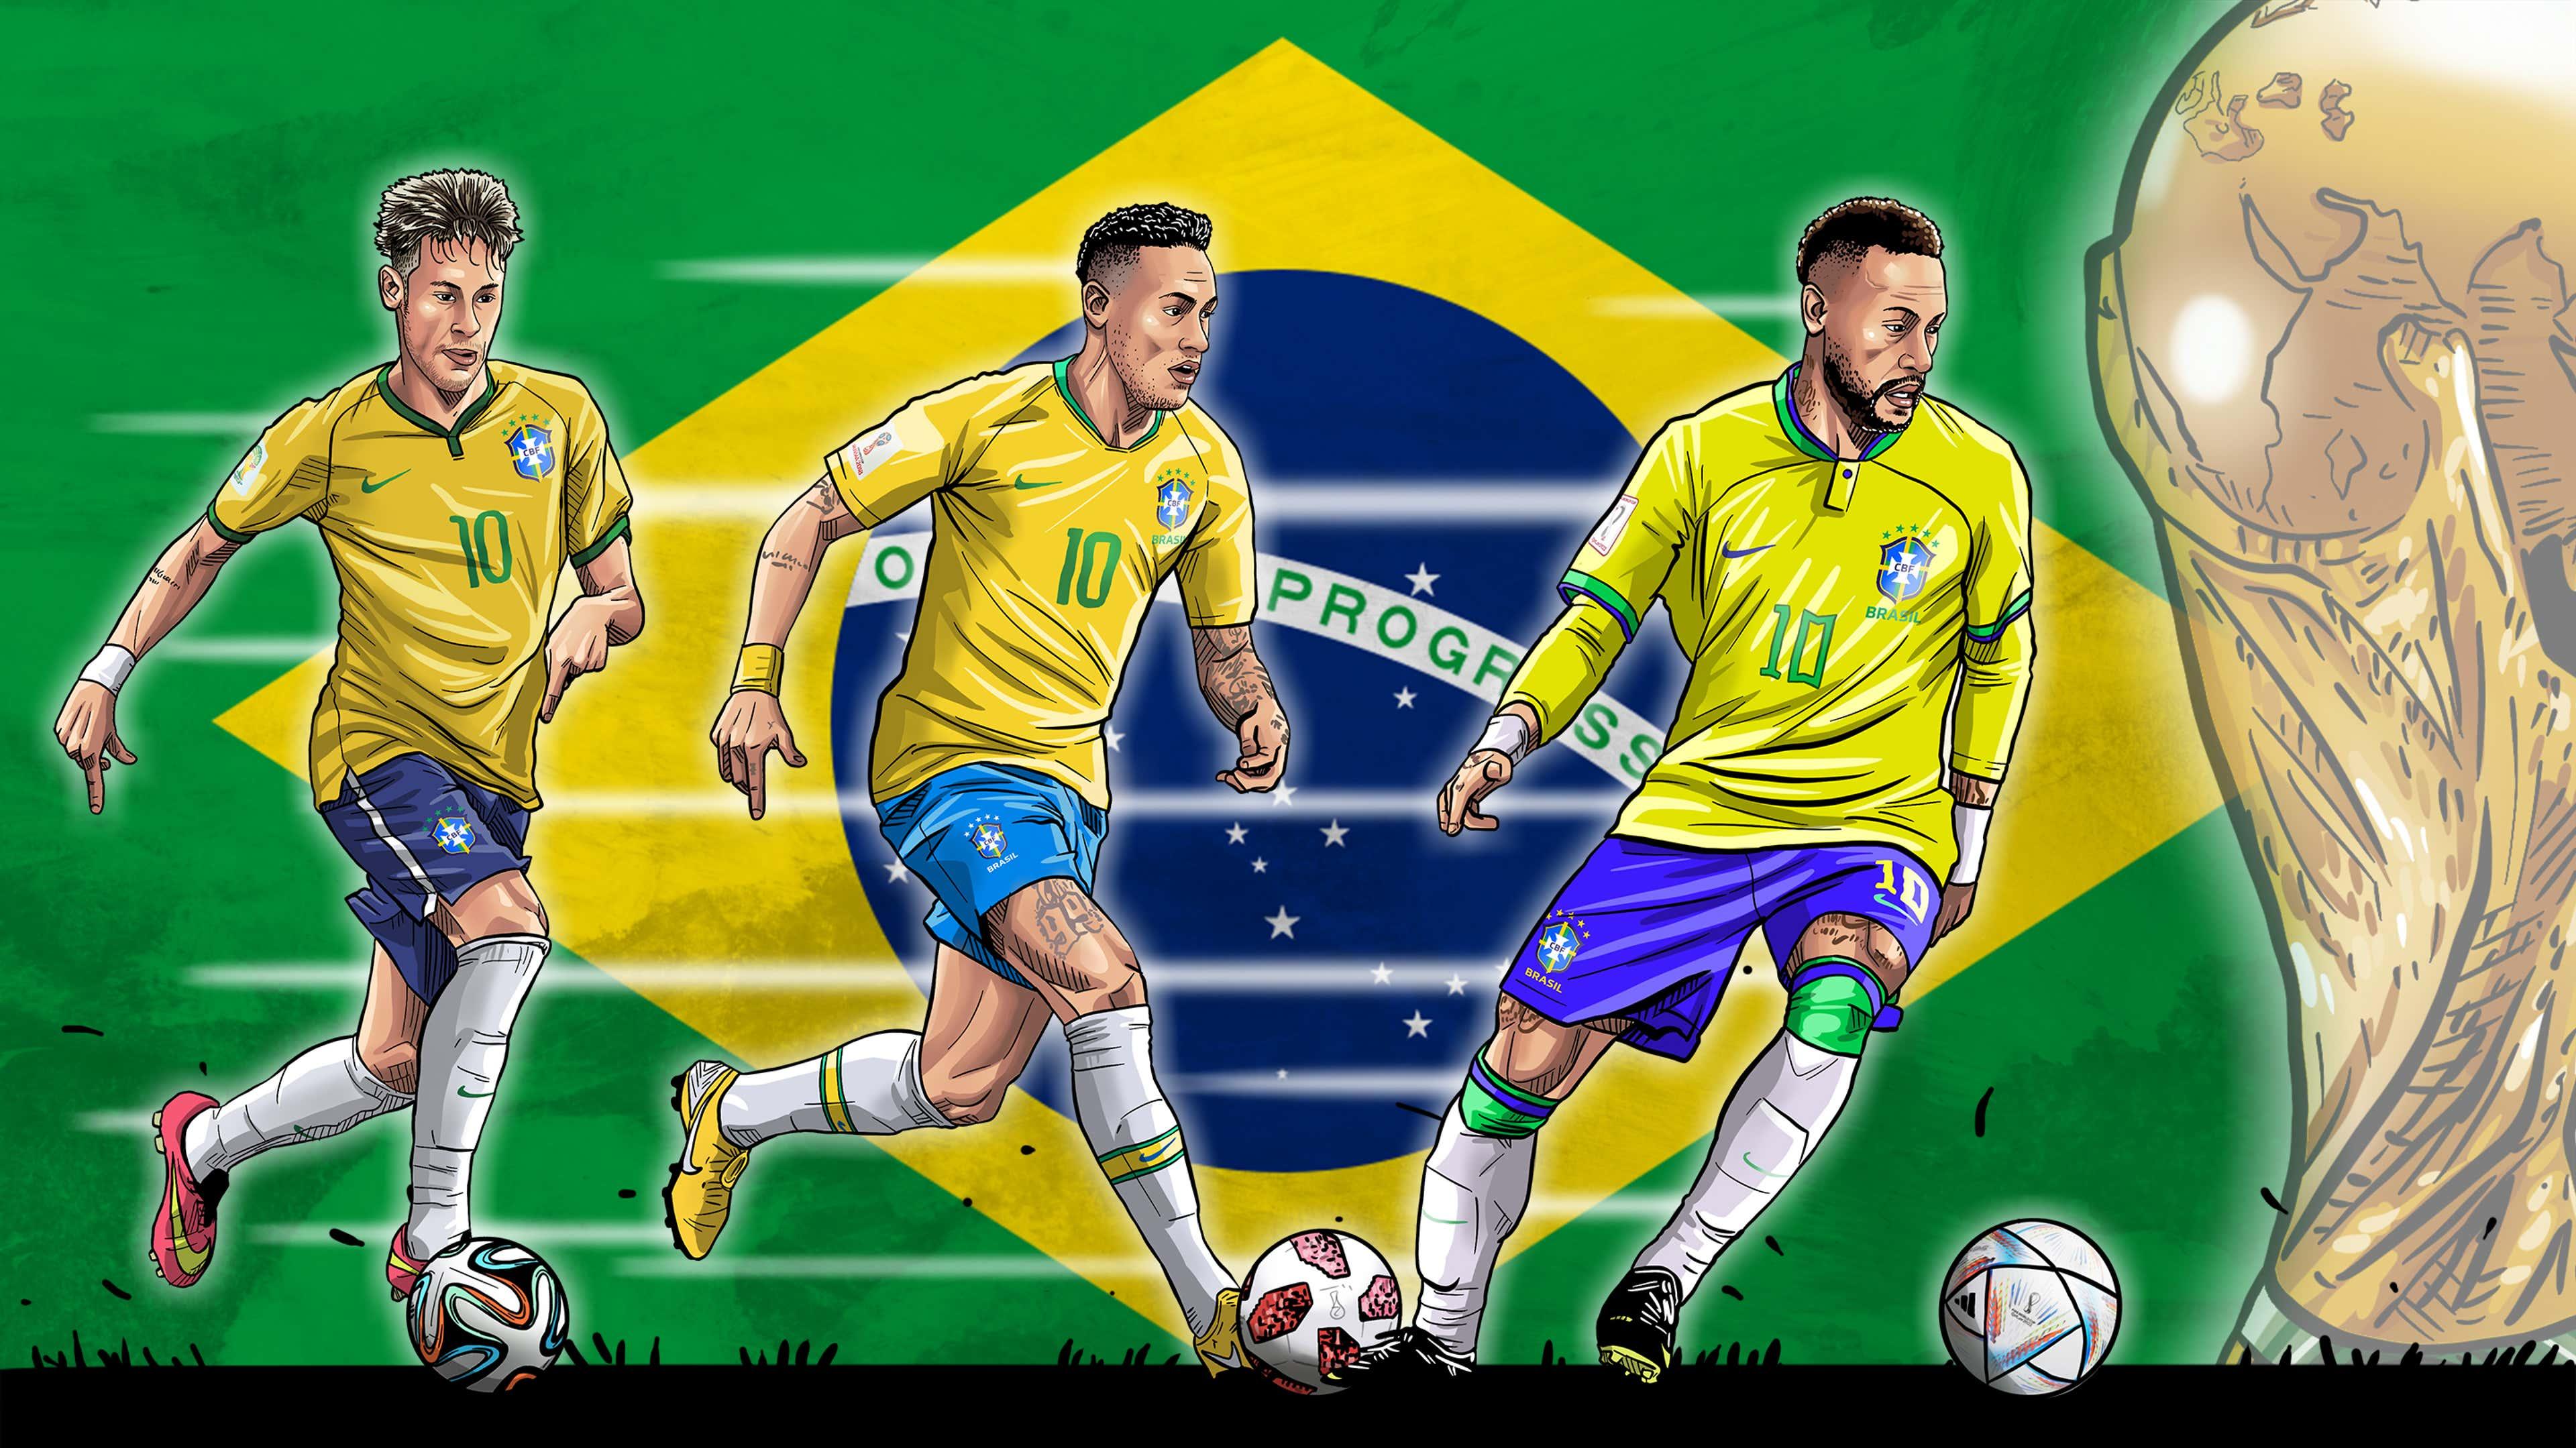 Neymar S Last Chance To Win The World Cup And Restore His